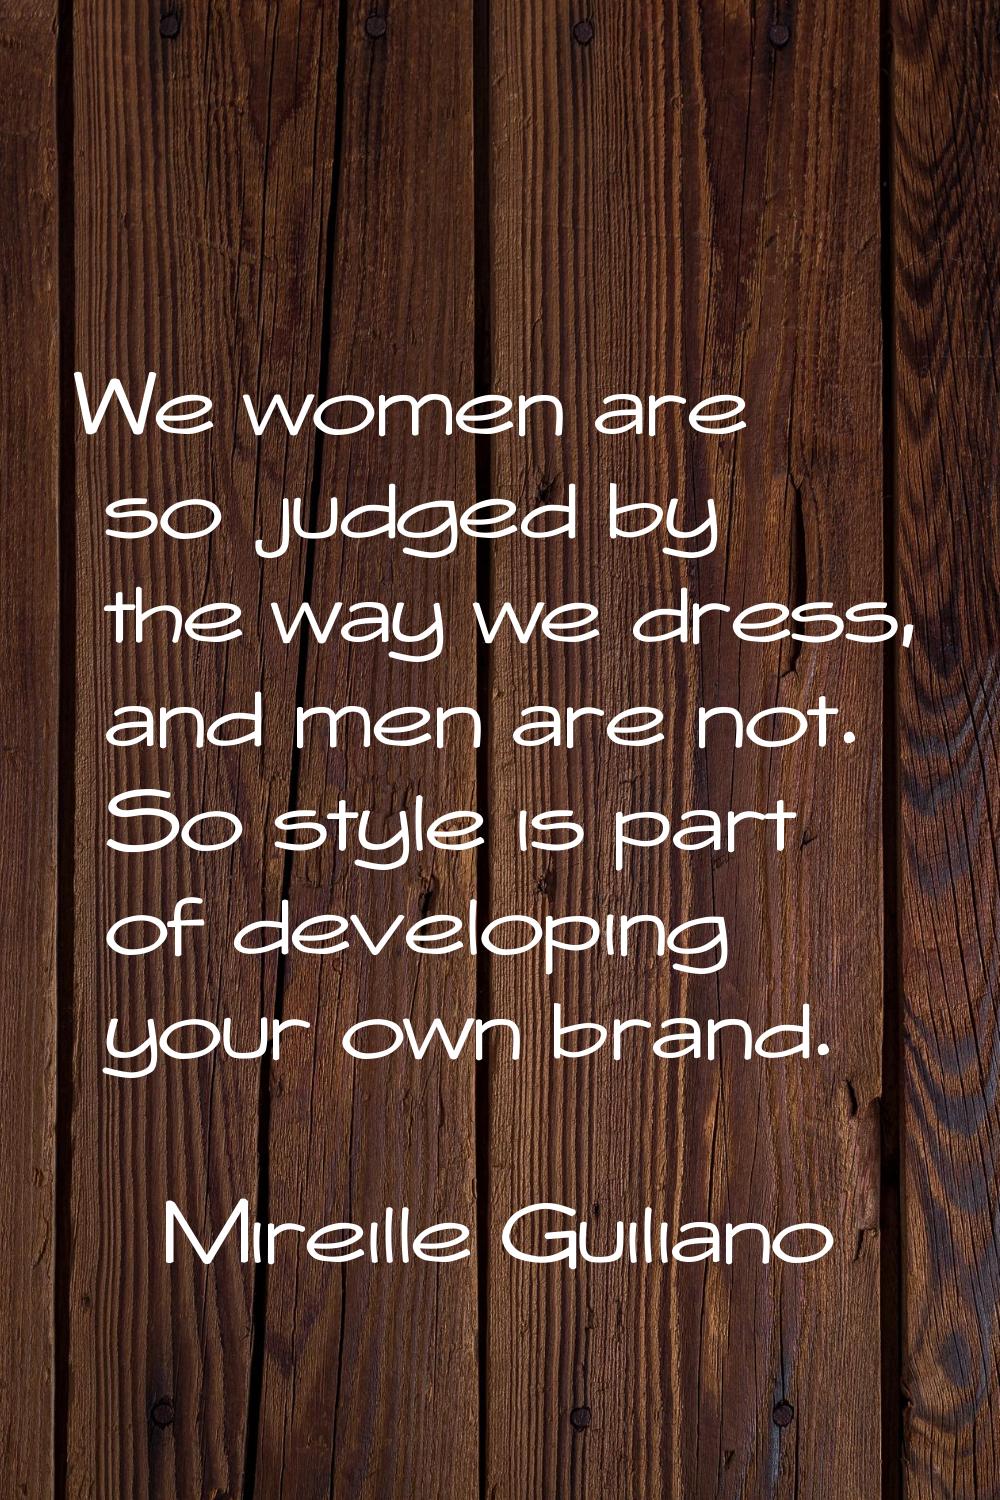 We women are so judged by the way we dress, and men are not. So style is part of developing your ow